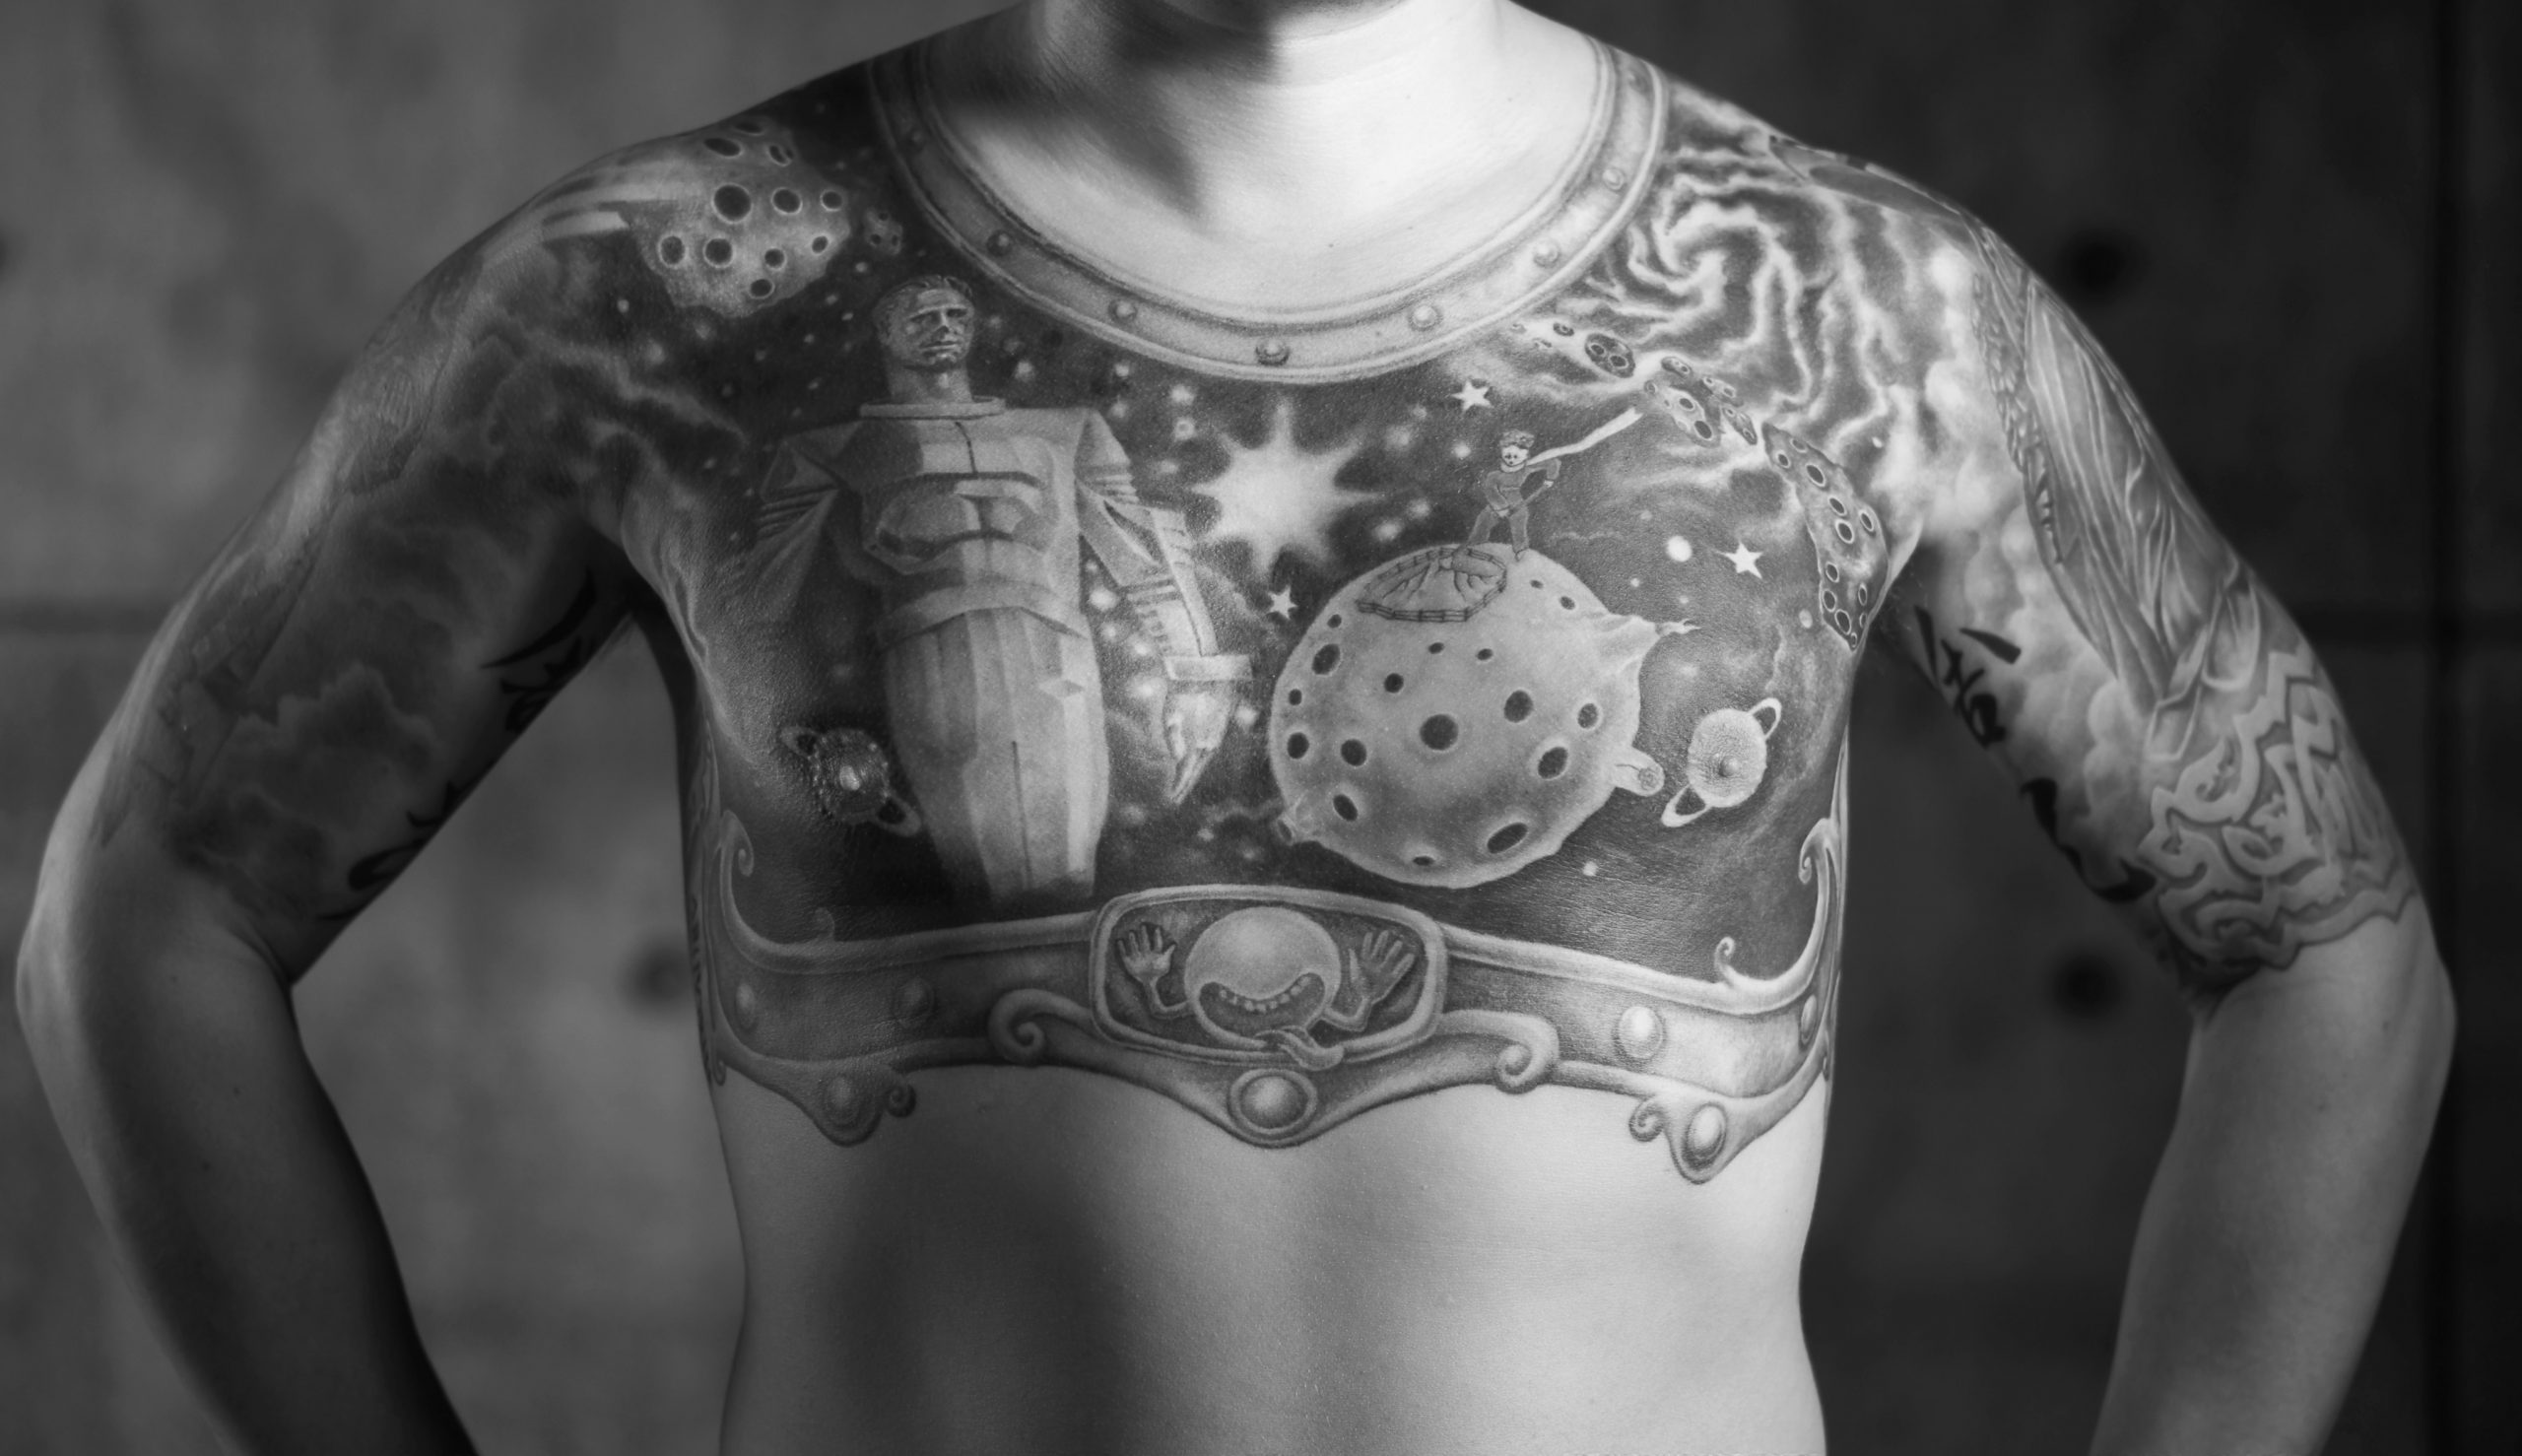 A black and white image of a man's chest featuring a large tattoo